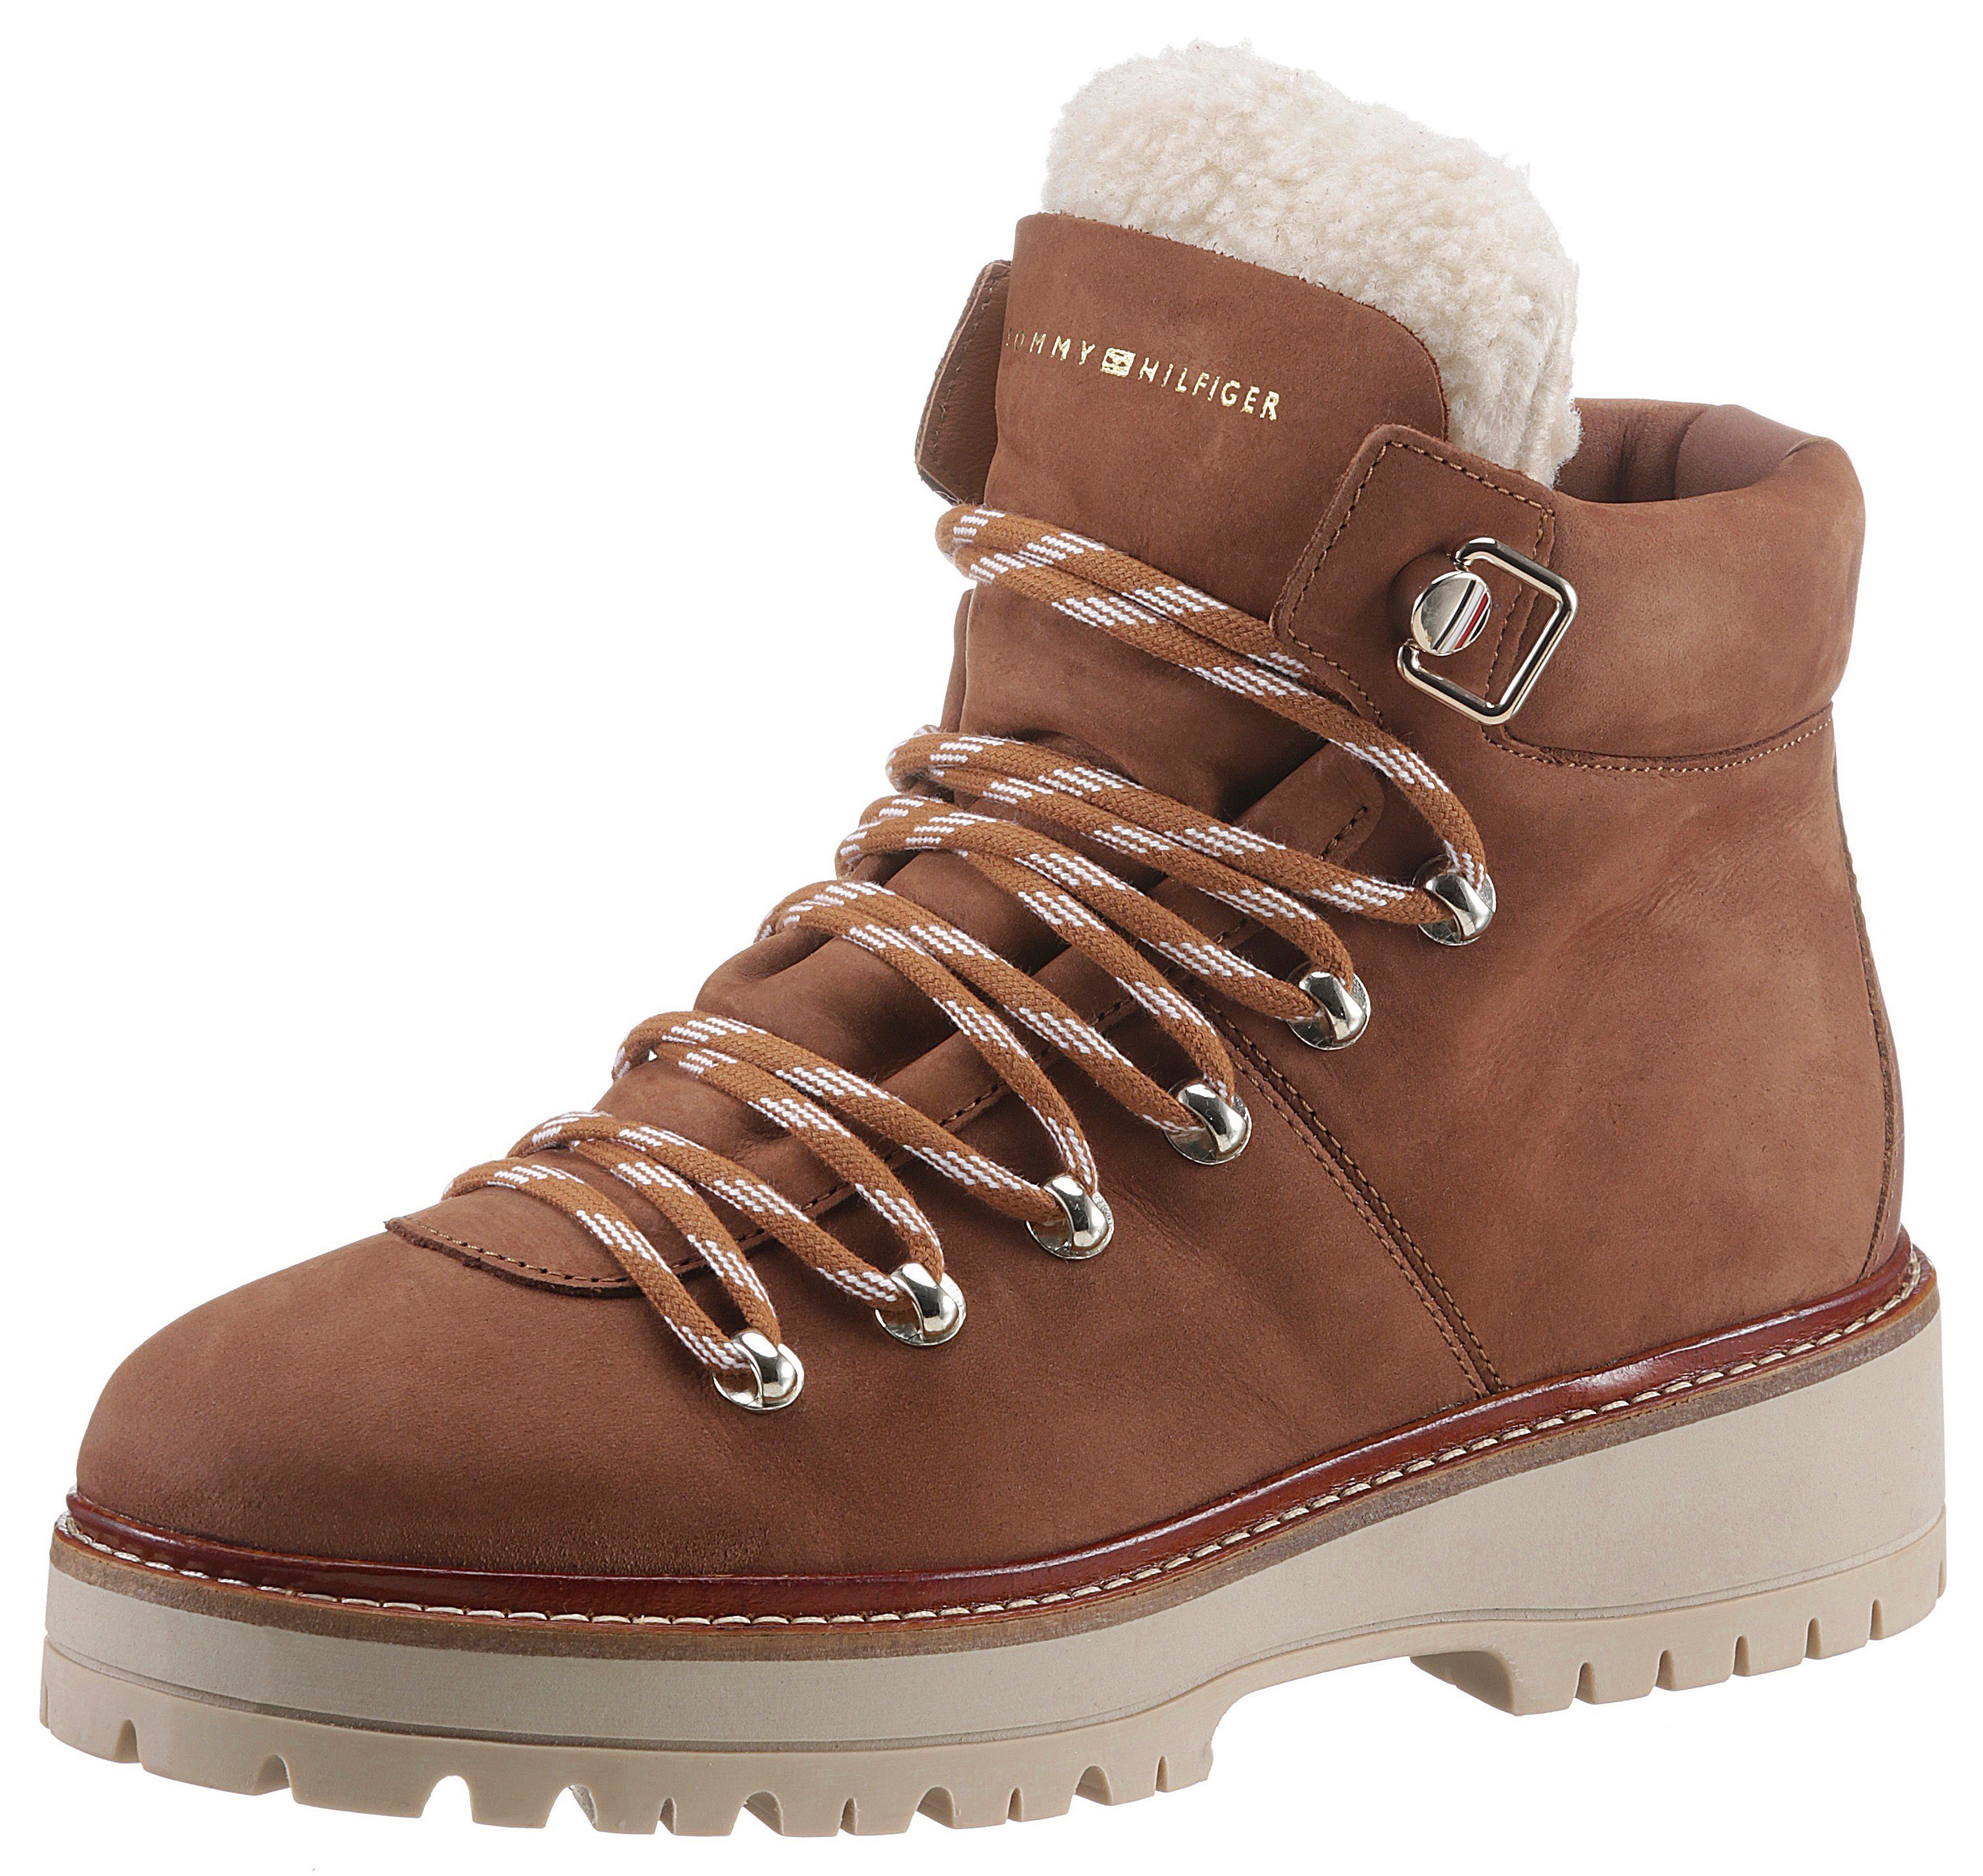 Tommy Hilfiger LEATHER OUTDOOR FLAT BOOT Winterboots im Bergsteiger-Look